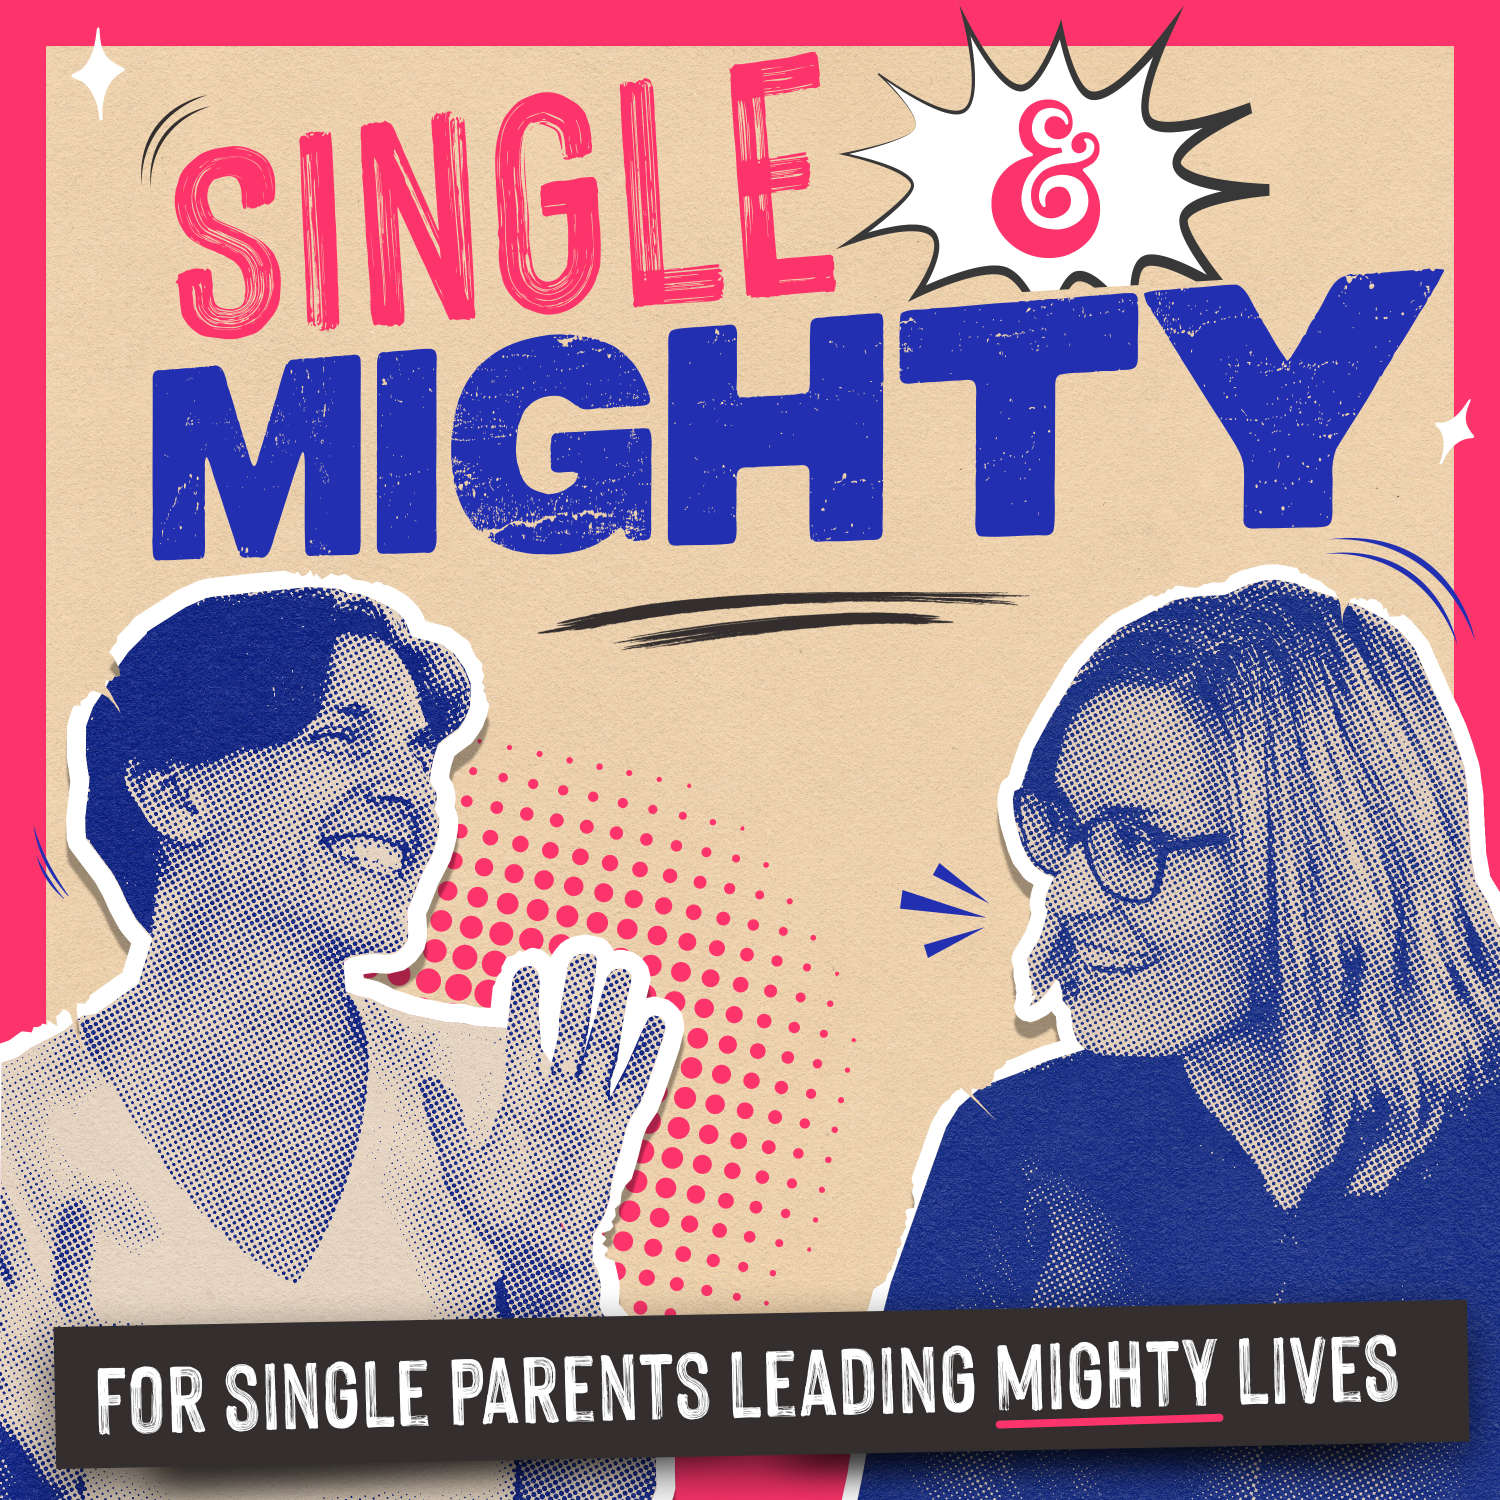 Lindsay Carlson and Carmel Ecker, hosts of Single & Mighty podcast.